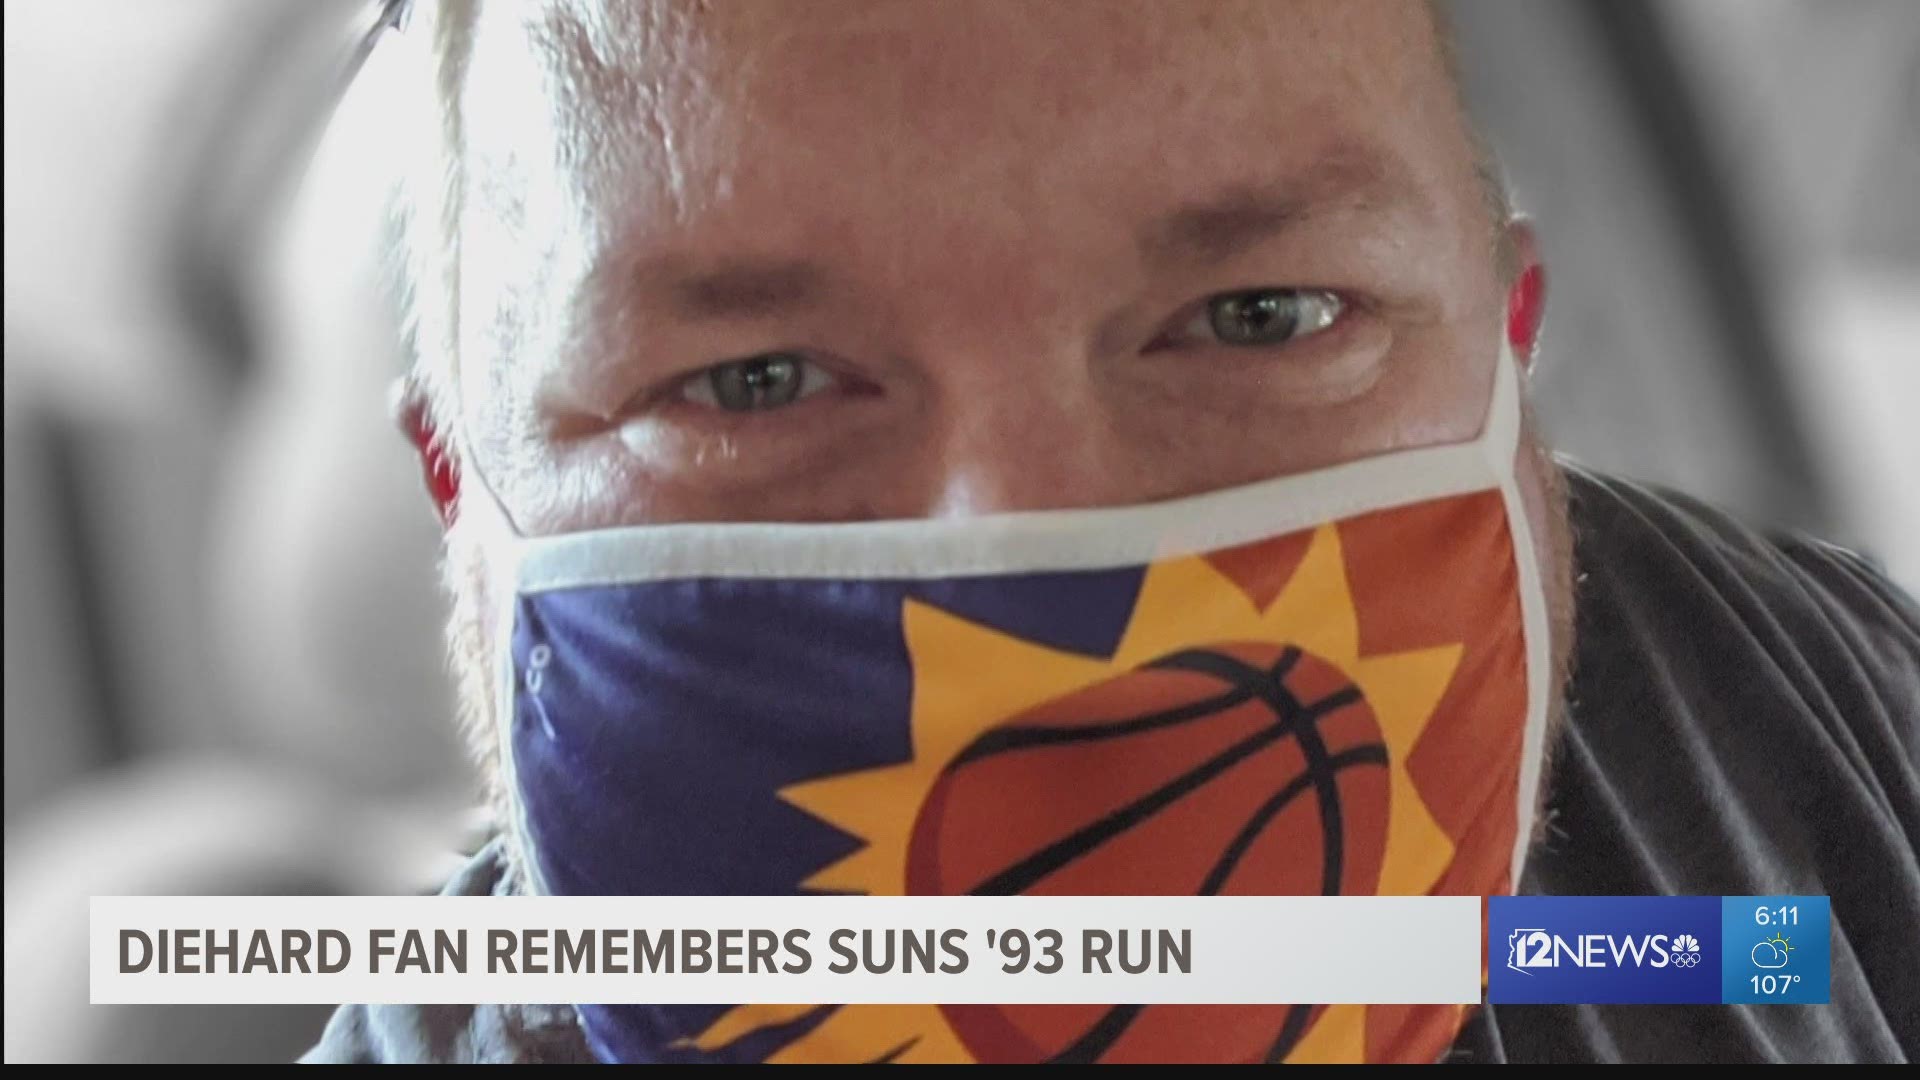 Troy Castle was 15 years old when the Valley rallied in downtown Phoenix to celebrate the 1993 Suns team.